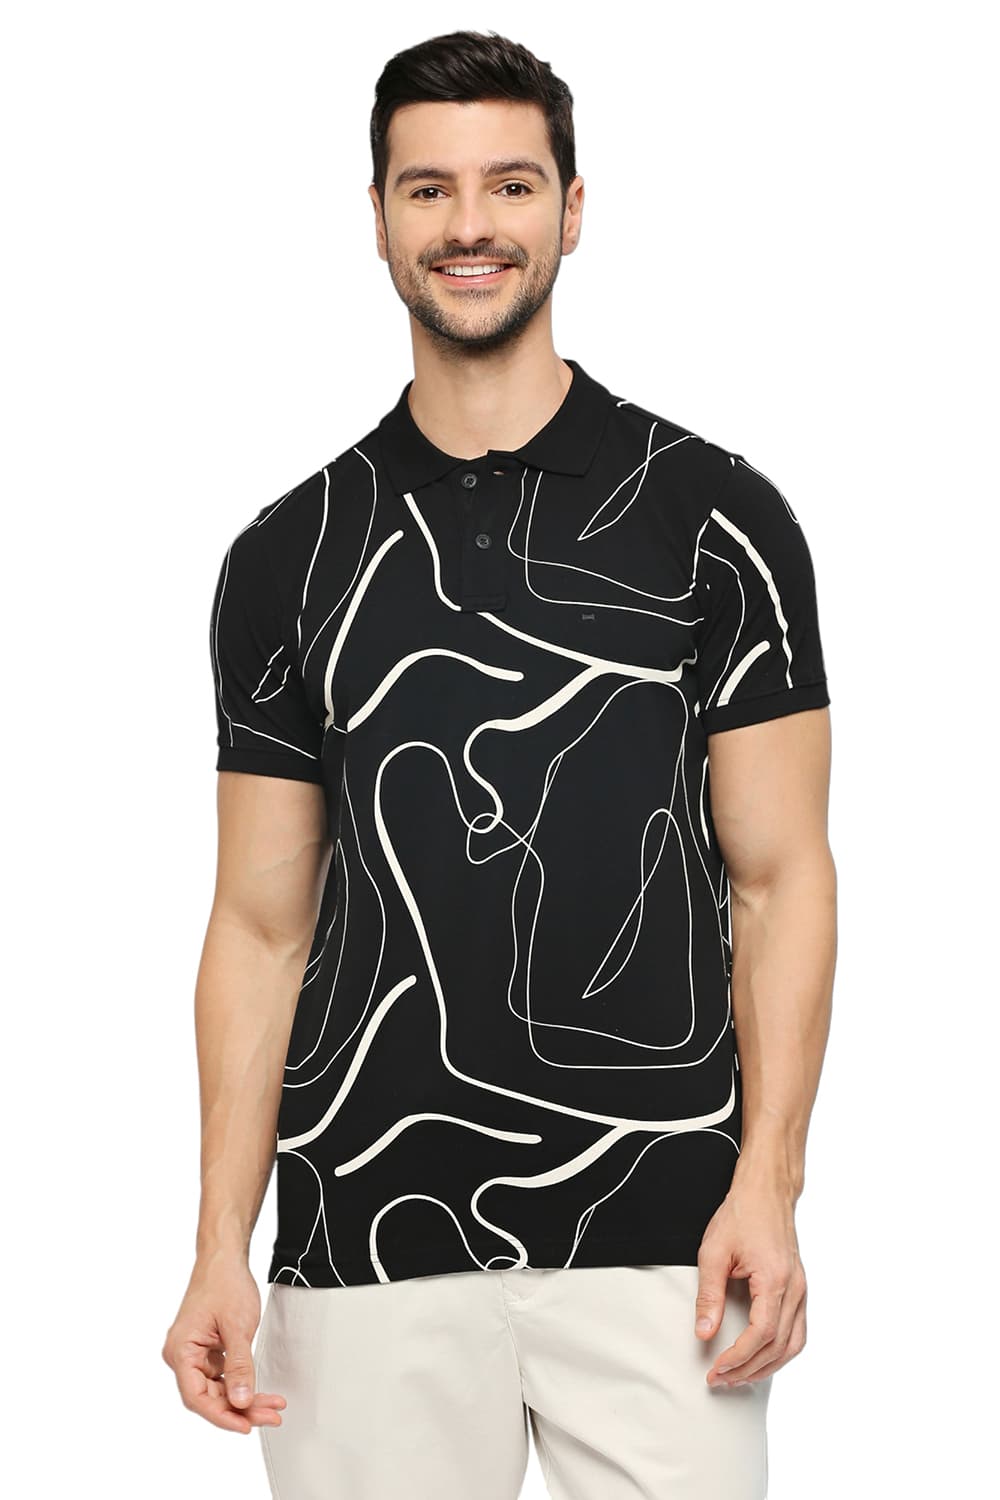 BASICS MUSCLE FIT COTTON PRINTED POLO T-SHIRTS